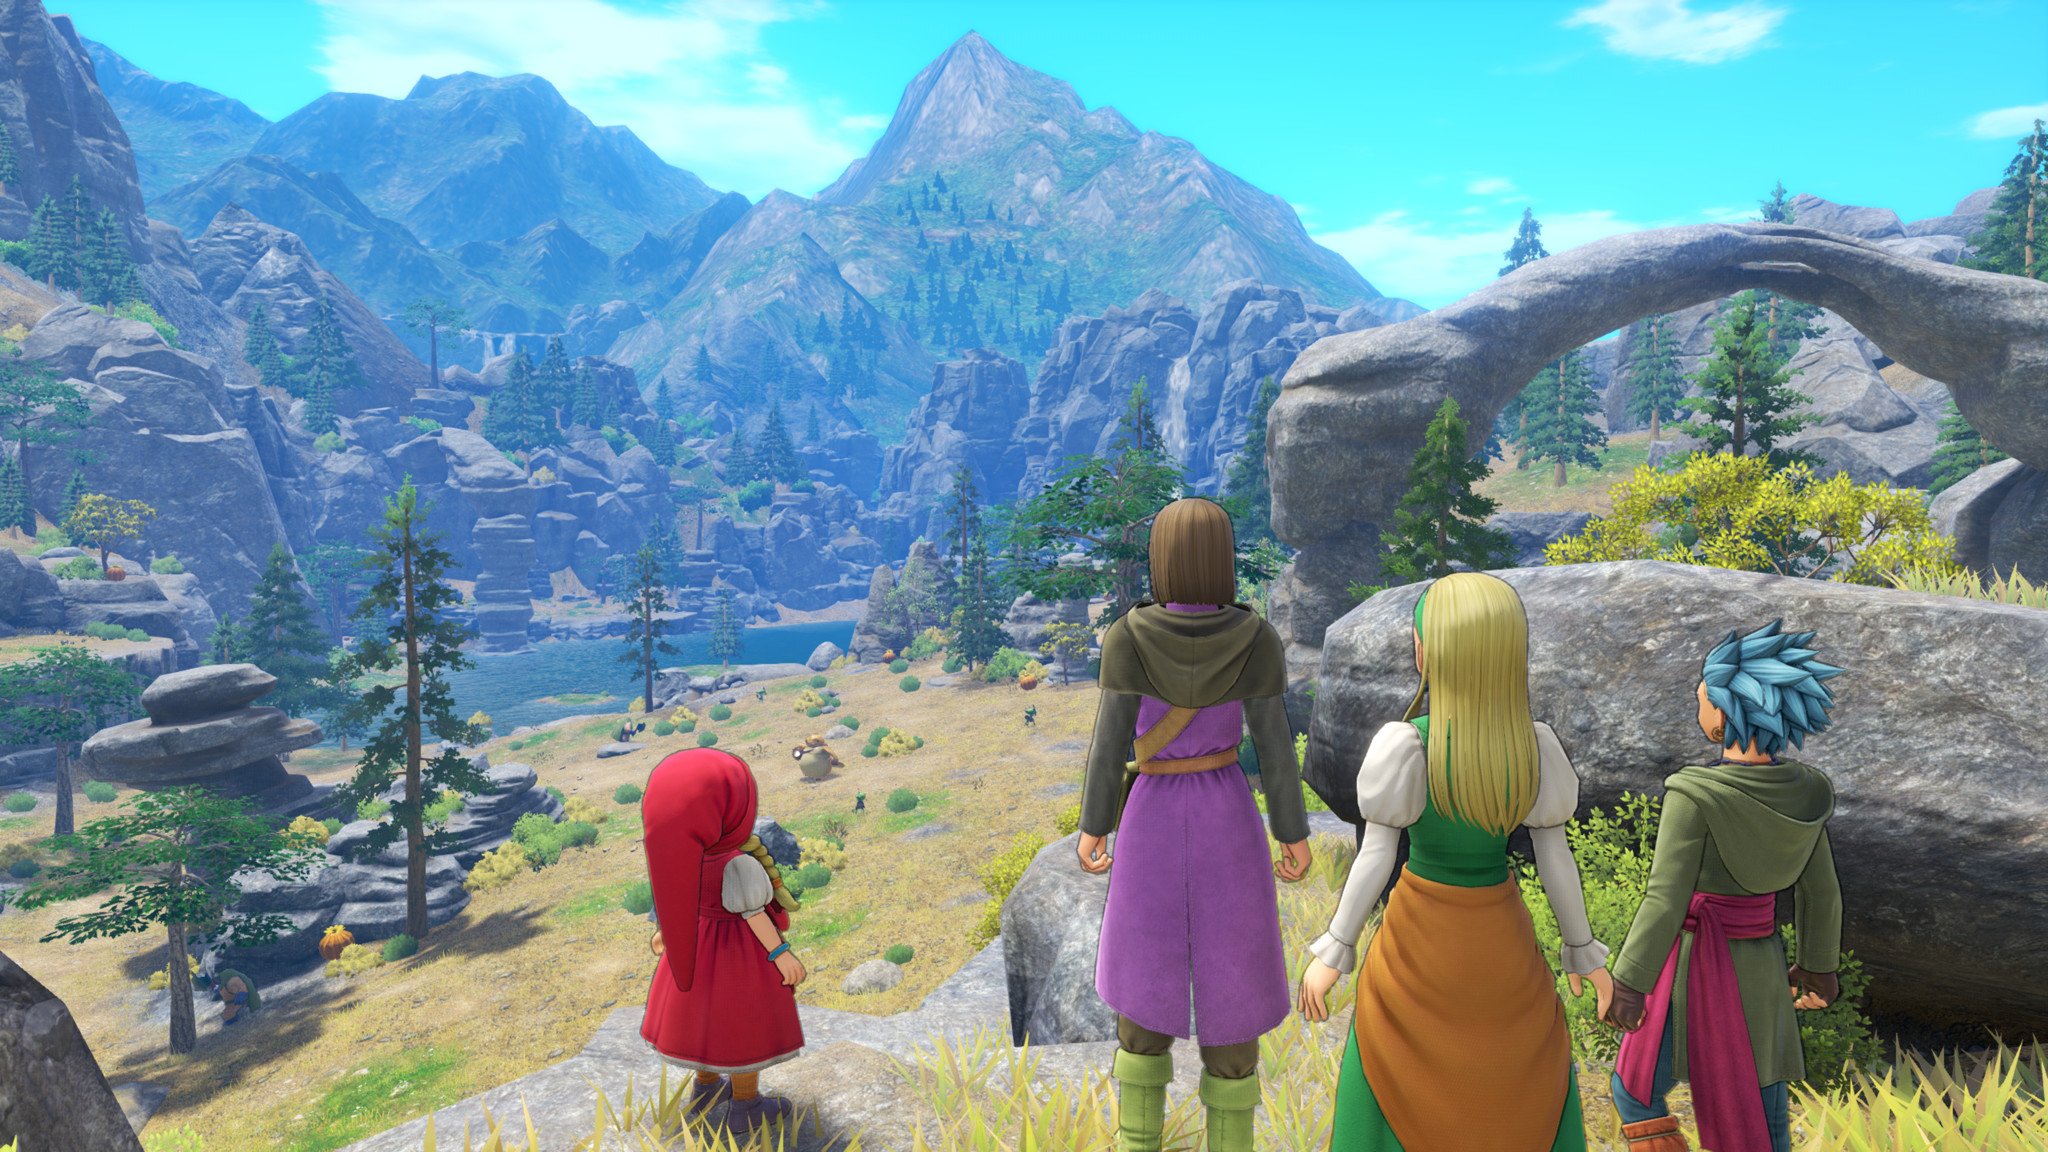 Dragon Quest Xi S Echoes Of An Elusive Age Xbox Review Old School Jrpg Fun For A New Generation Windows Central